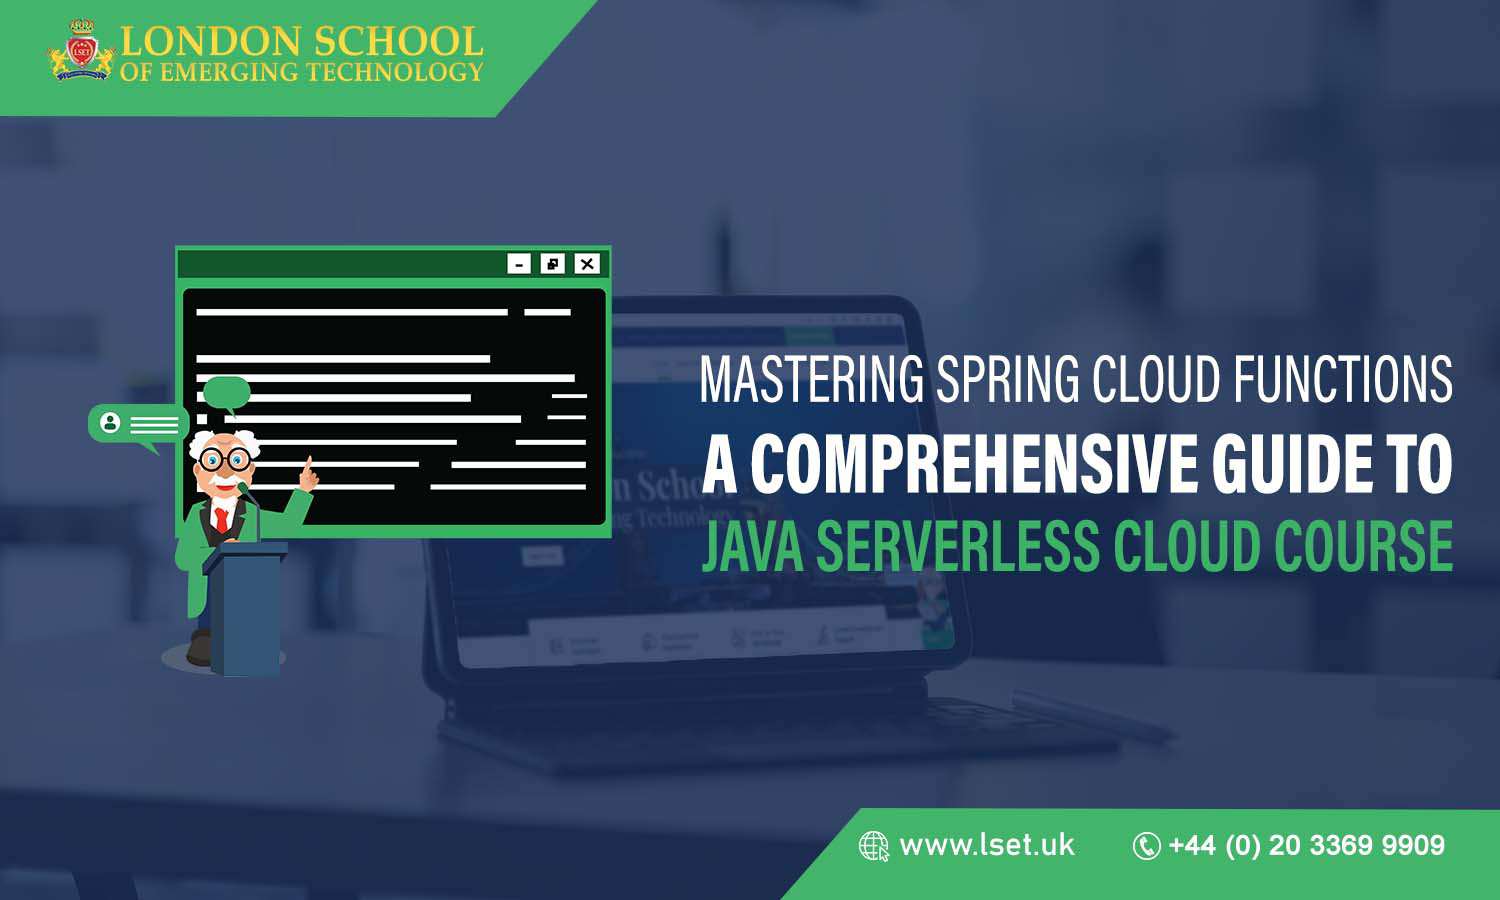 Mastering Spring Cloud Functions A Comprehensive Guide to Java Serverless Cloud Course